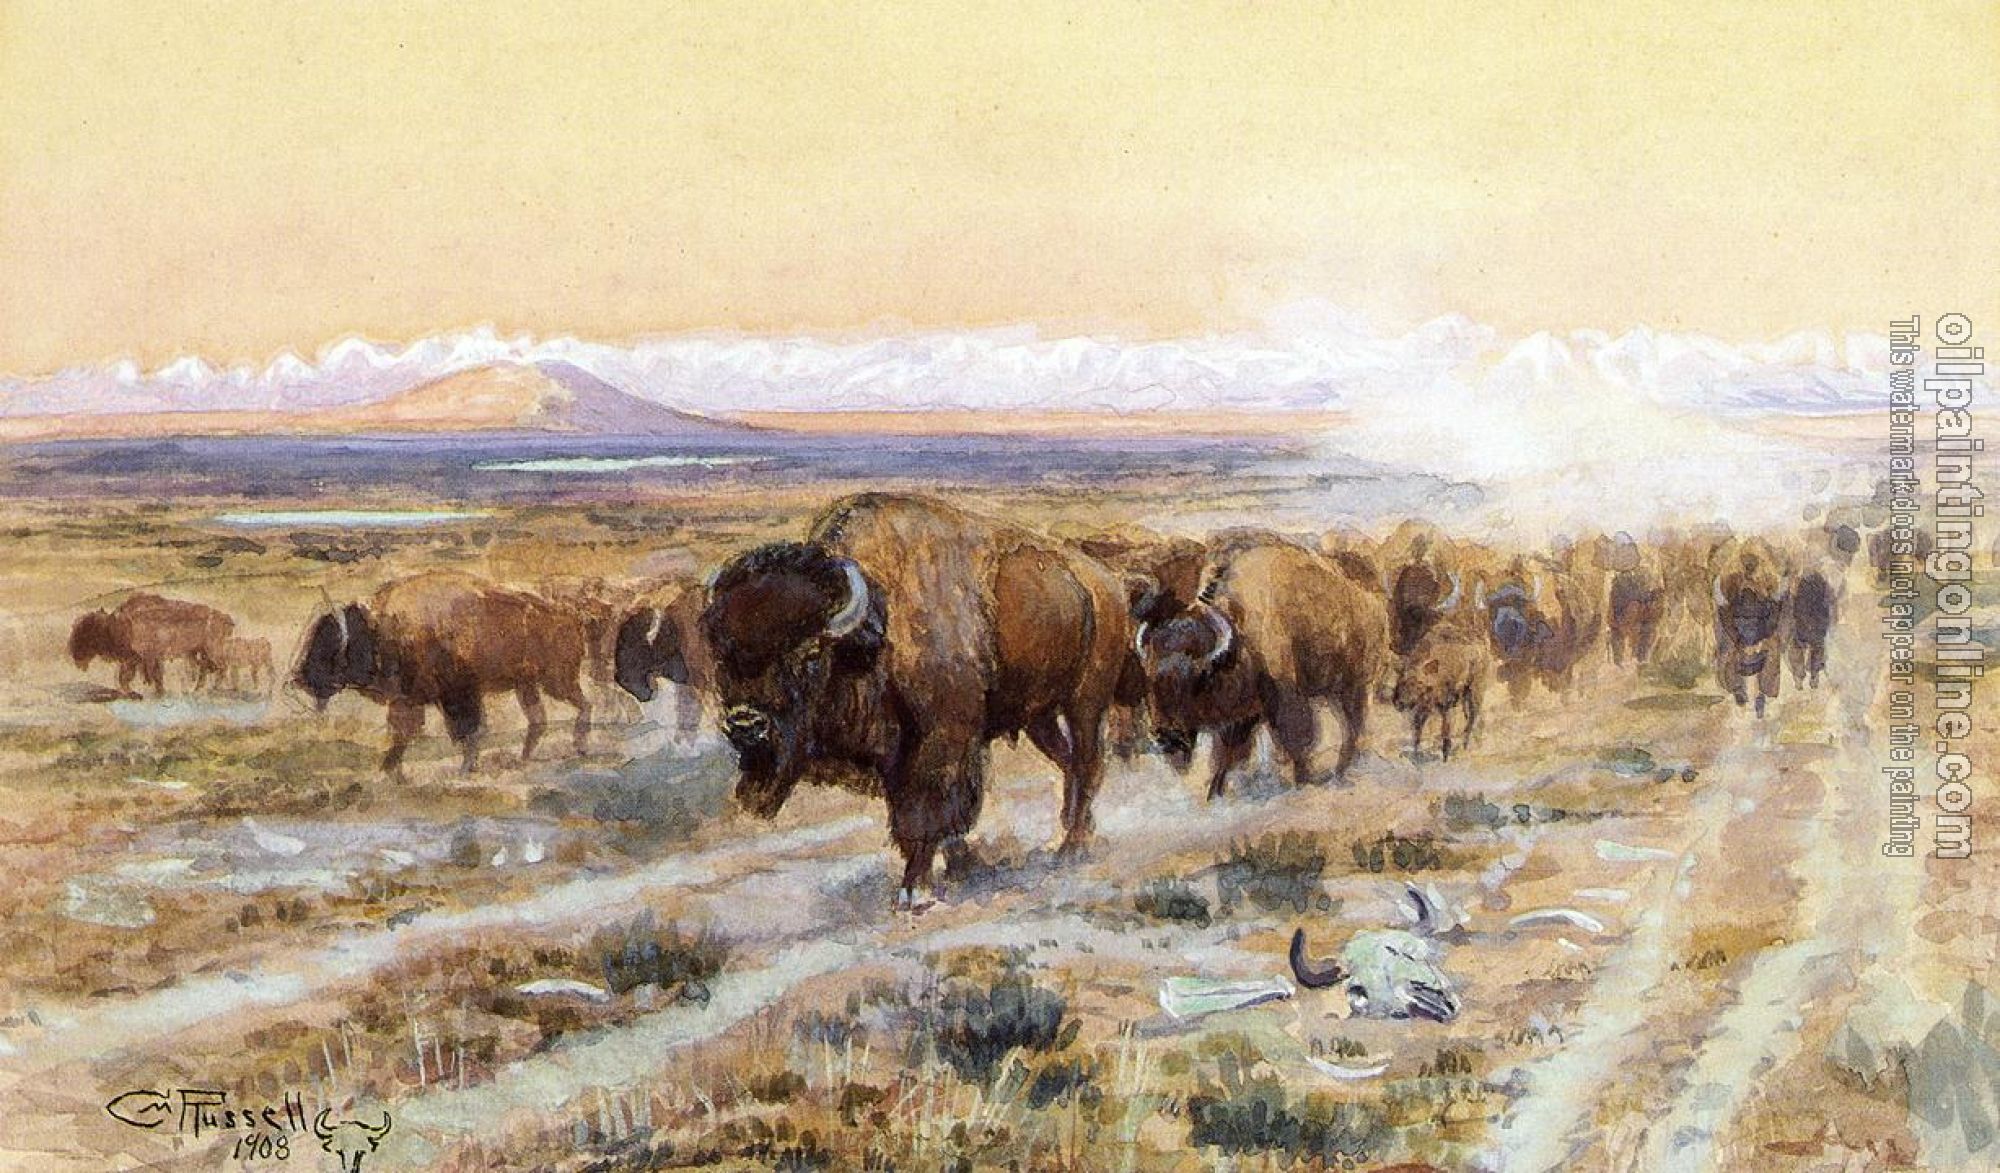 Charles Marion Russell - The Bison Trail